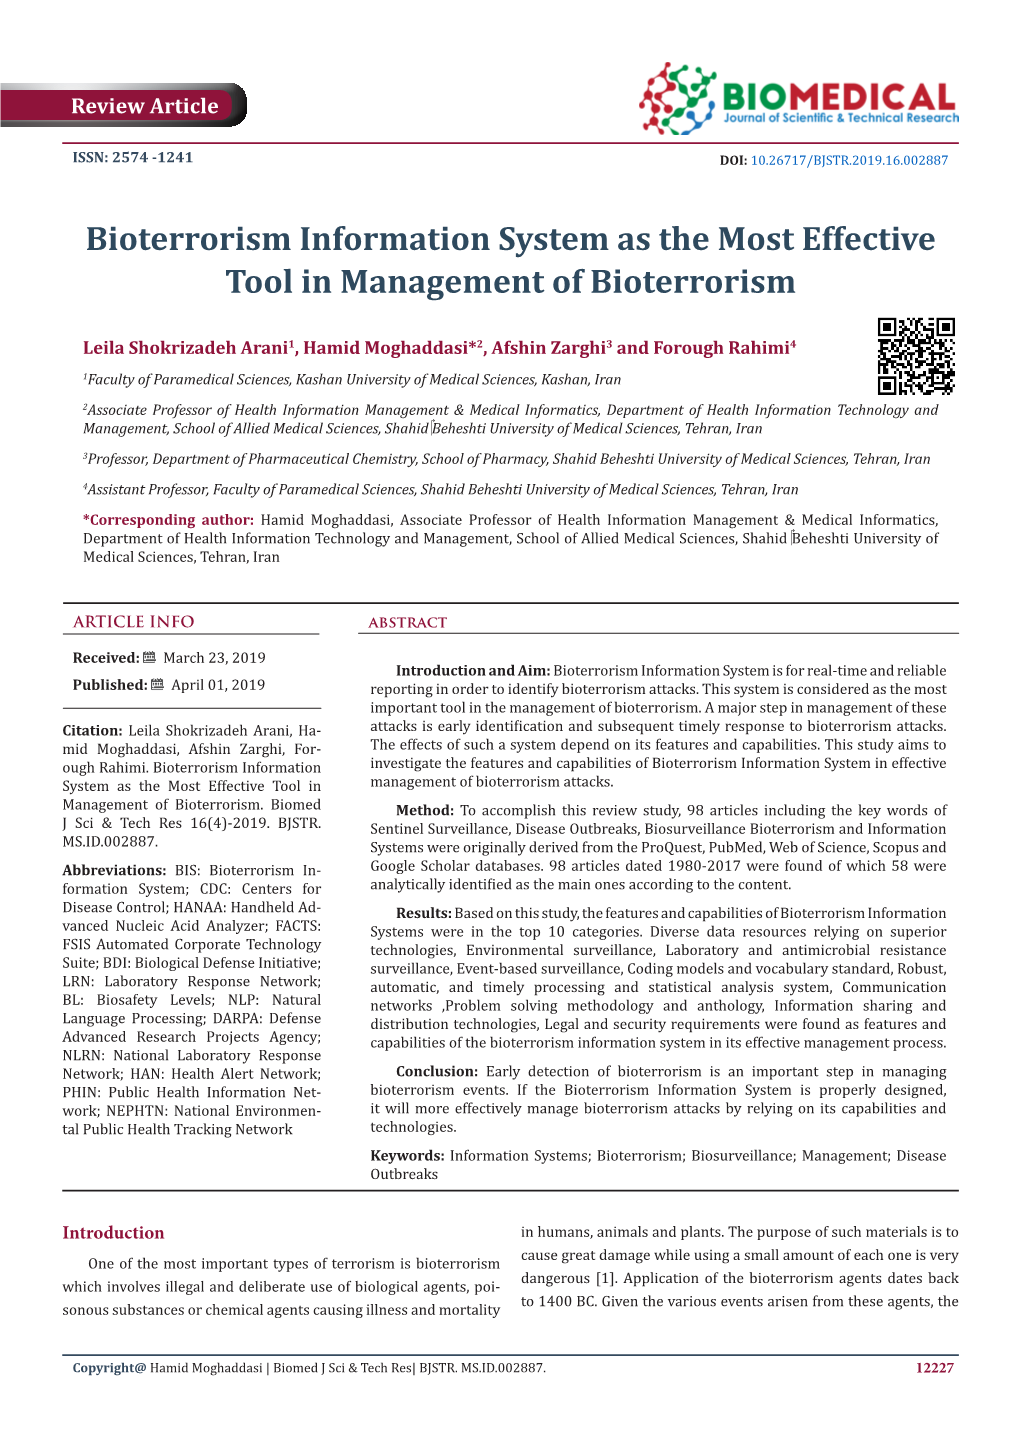 Bioterrorism Information System As the Most Effective Tool in Management of Bioterrorism